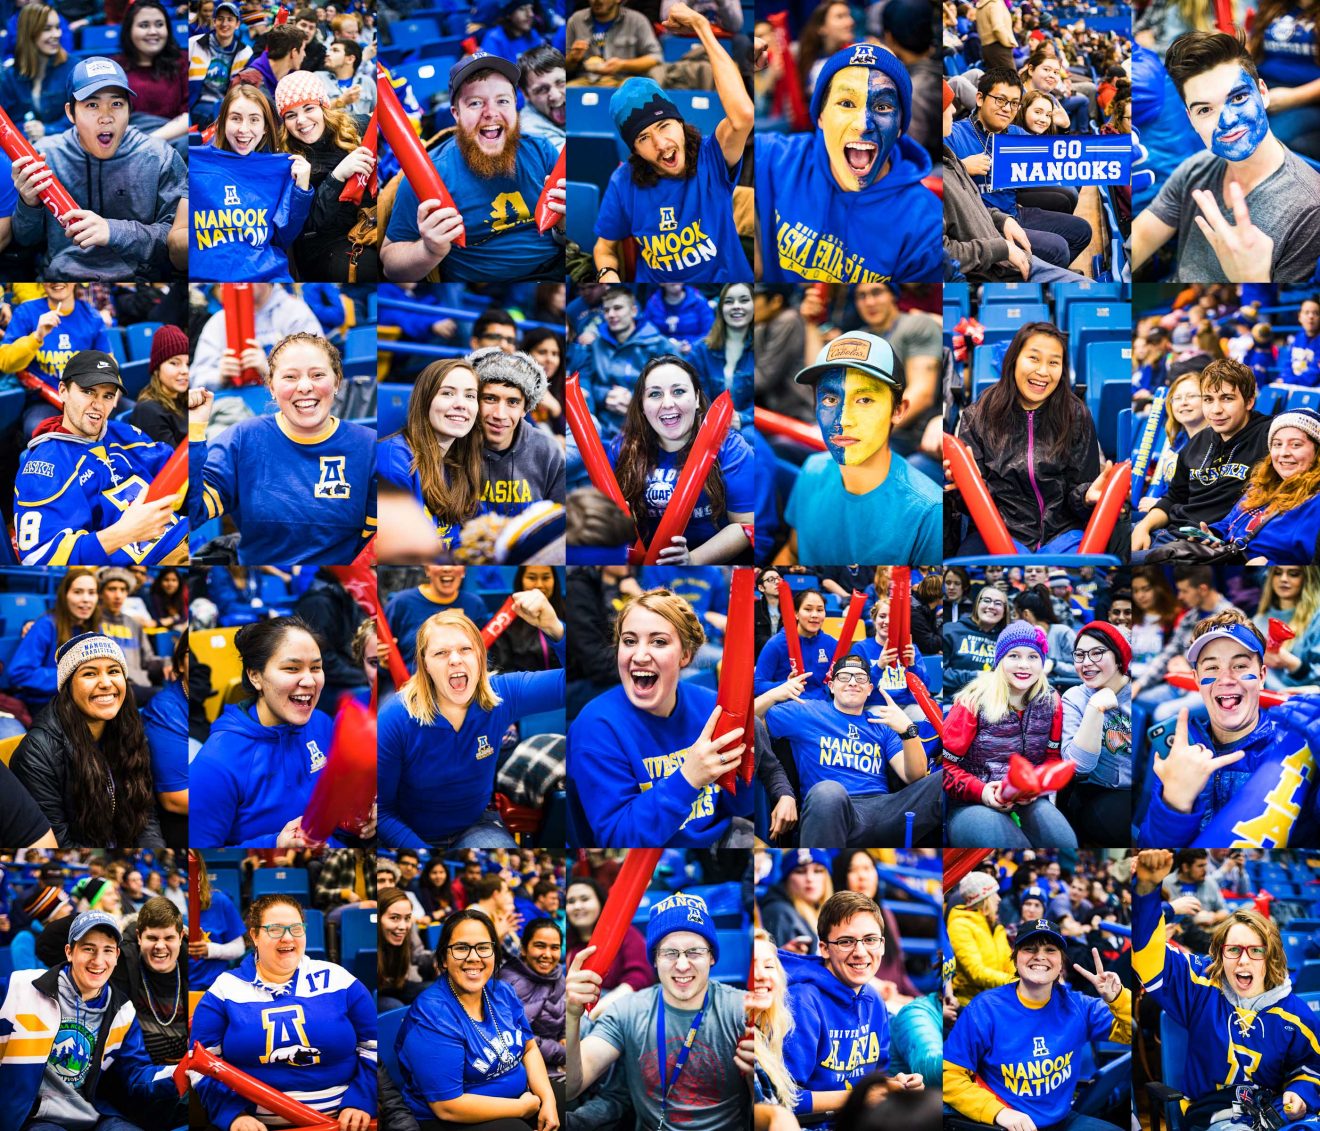 Wear your blue and gold to the Alaska Airlines Governor's Cup games this weekend at the Carlson Center. Go Nooks!